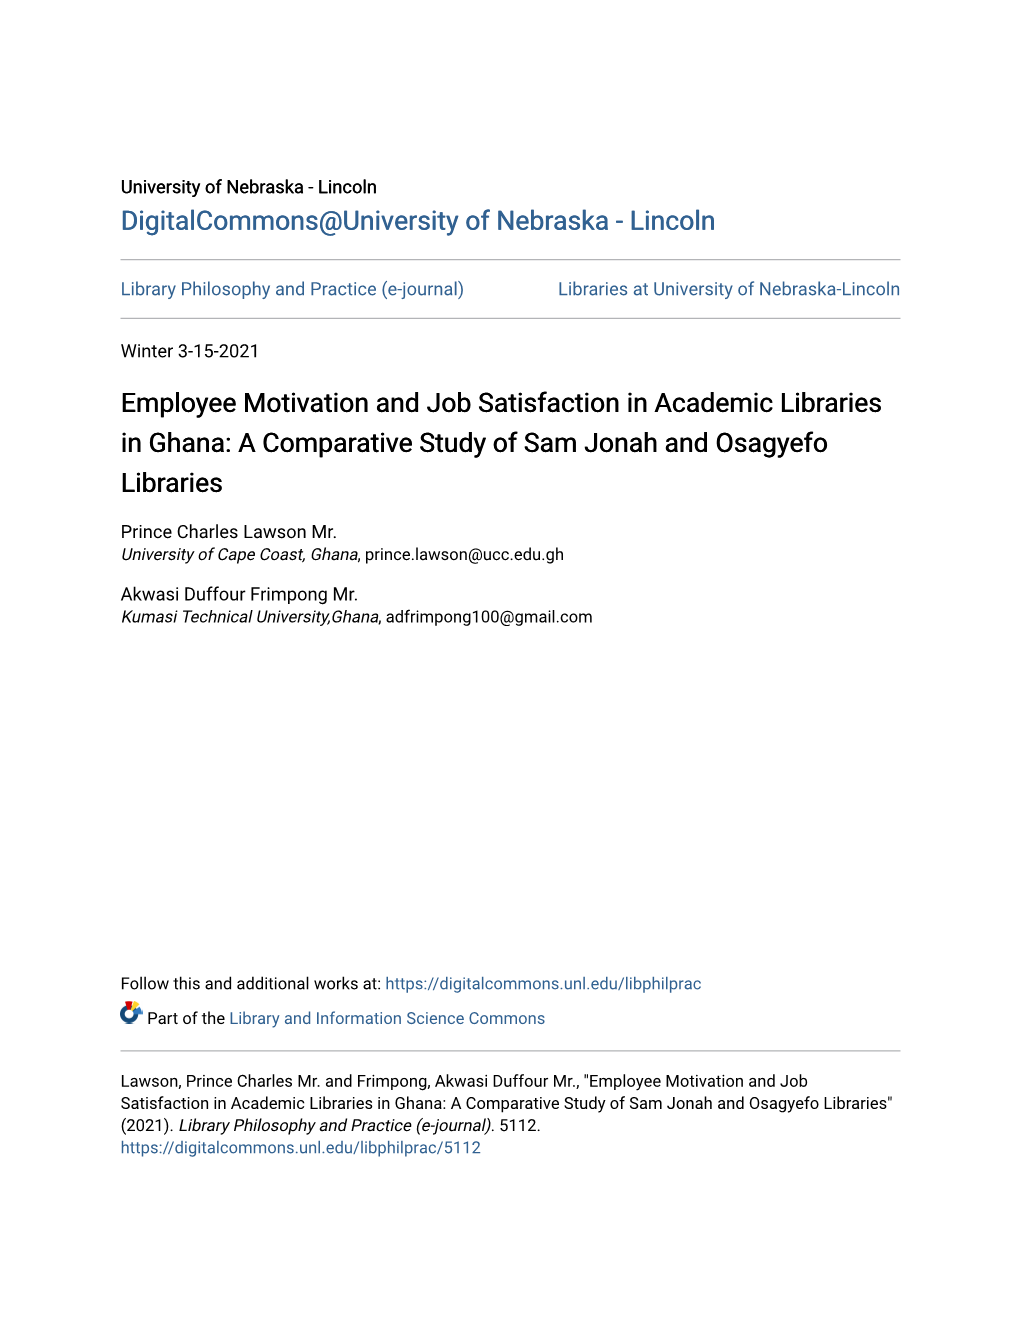 Employee Motivation and Job Satisfaction in Academic Libraries in Ghana: a Comparative Study of Sam Jonah and Osagyefo Libraries